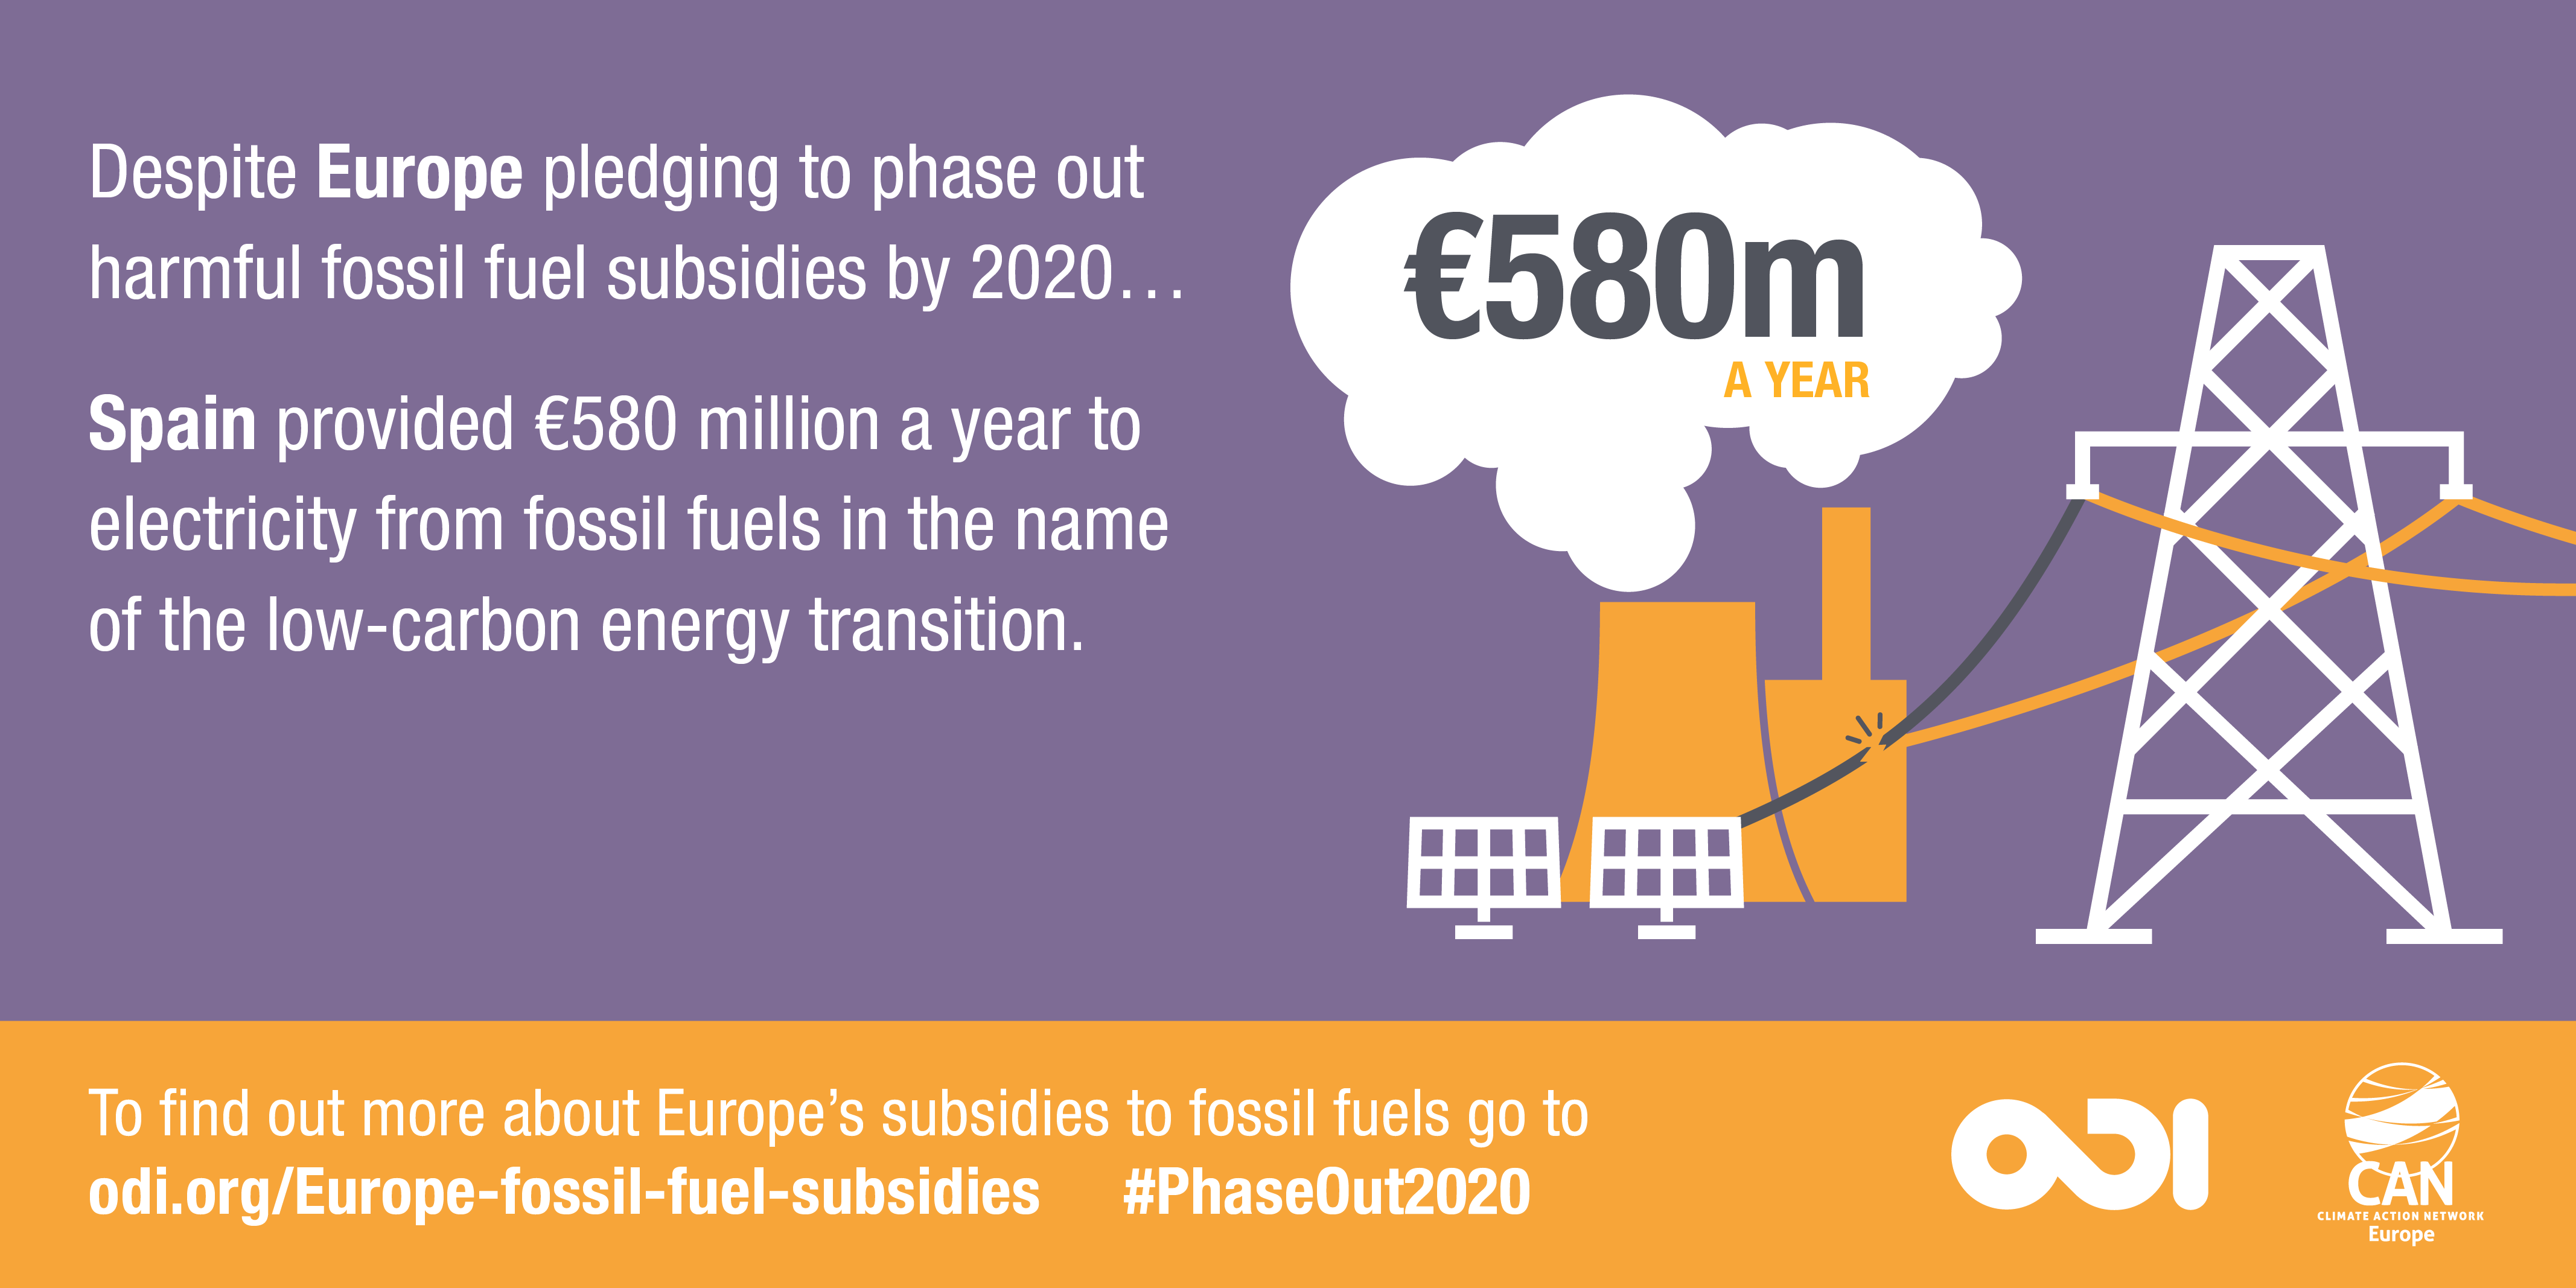 Infographic: Spain provided €580 million a year to electricity from fossil fuels in the name of the low-carbon energy transition.